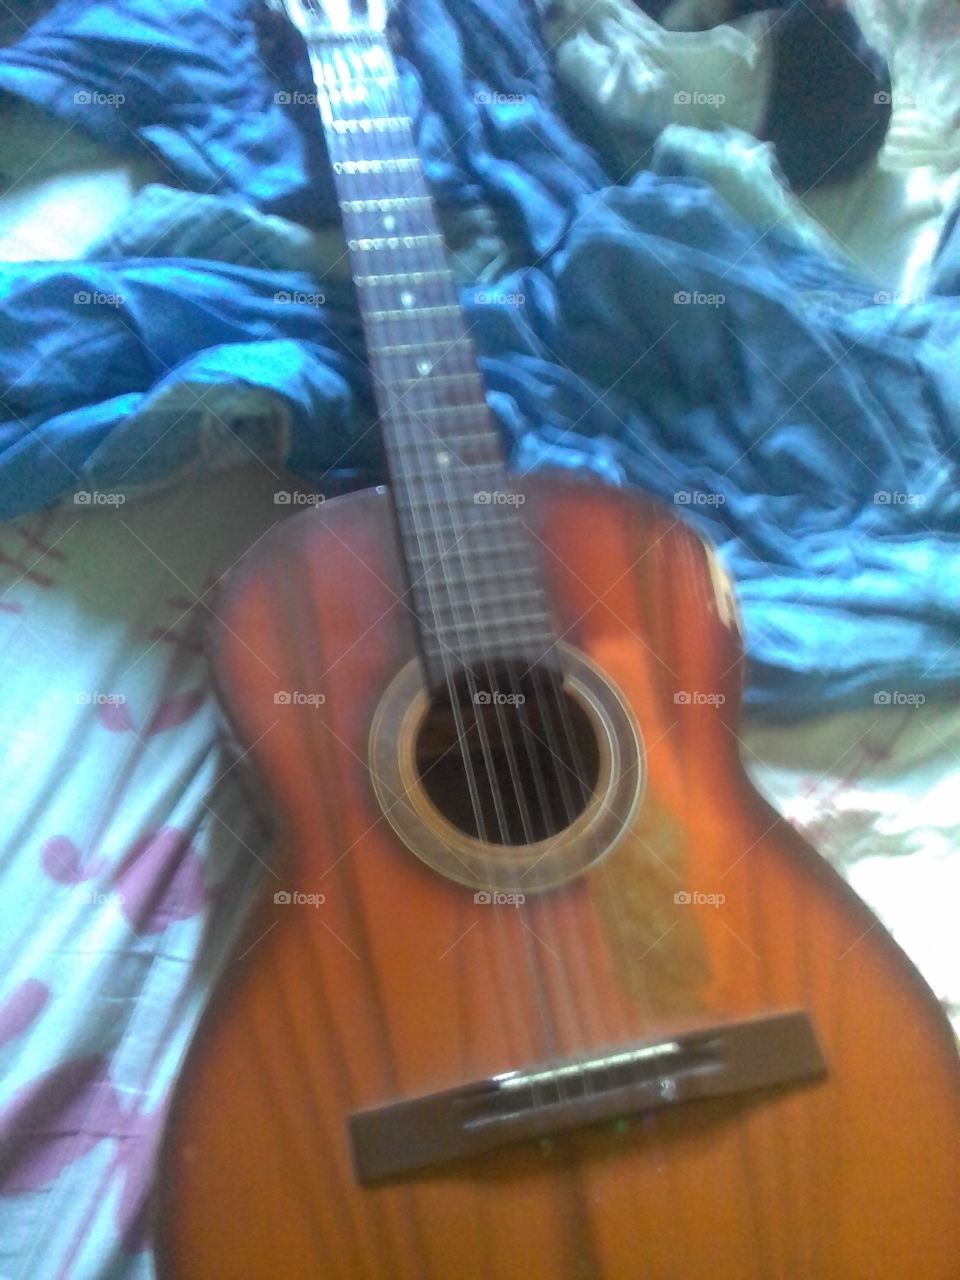 the Old guitar